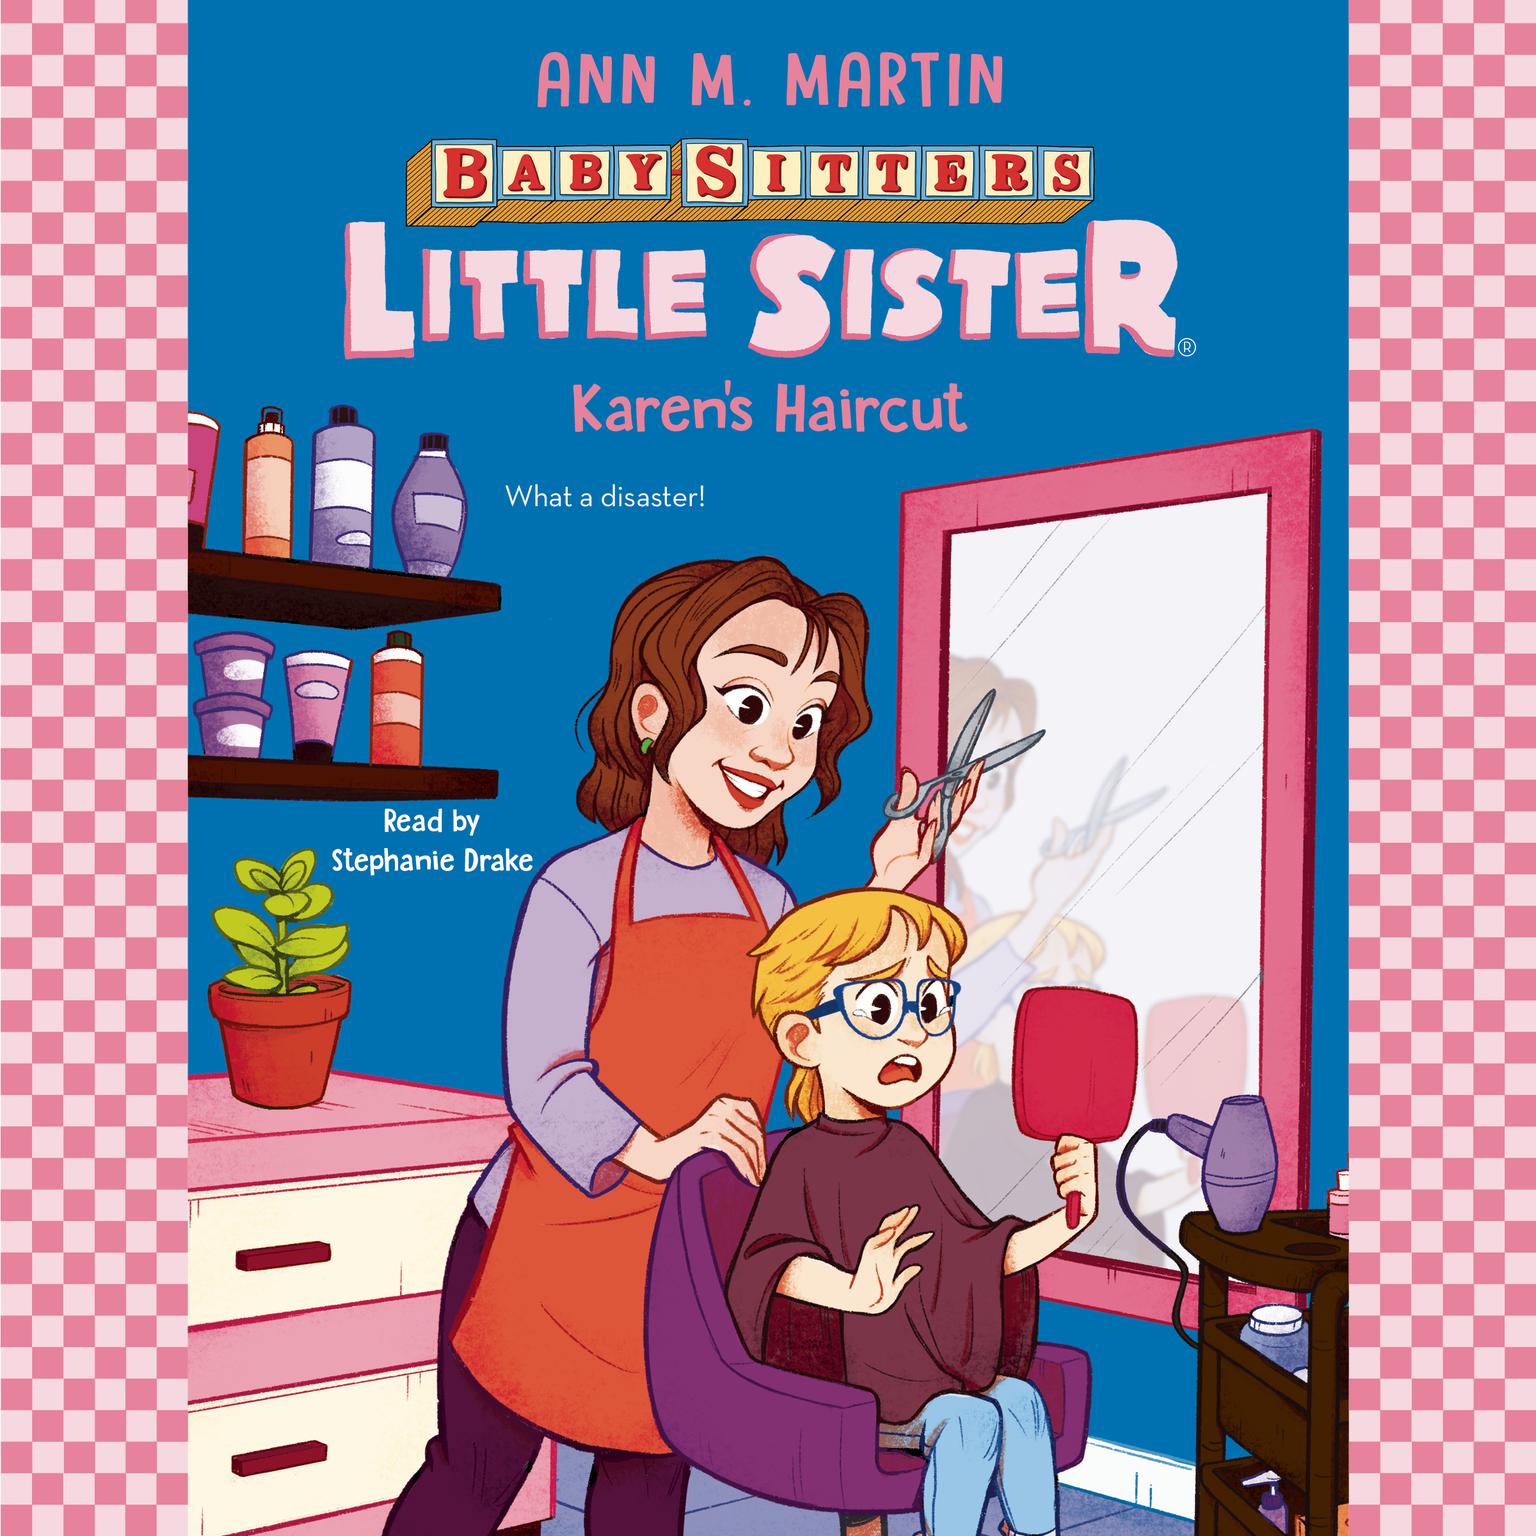 Karens Haircut (Baby-Sitters Little Sister #8) Audiobook, by Ann M. Martin